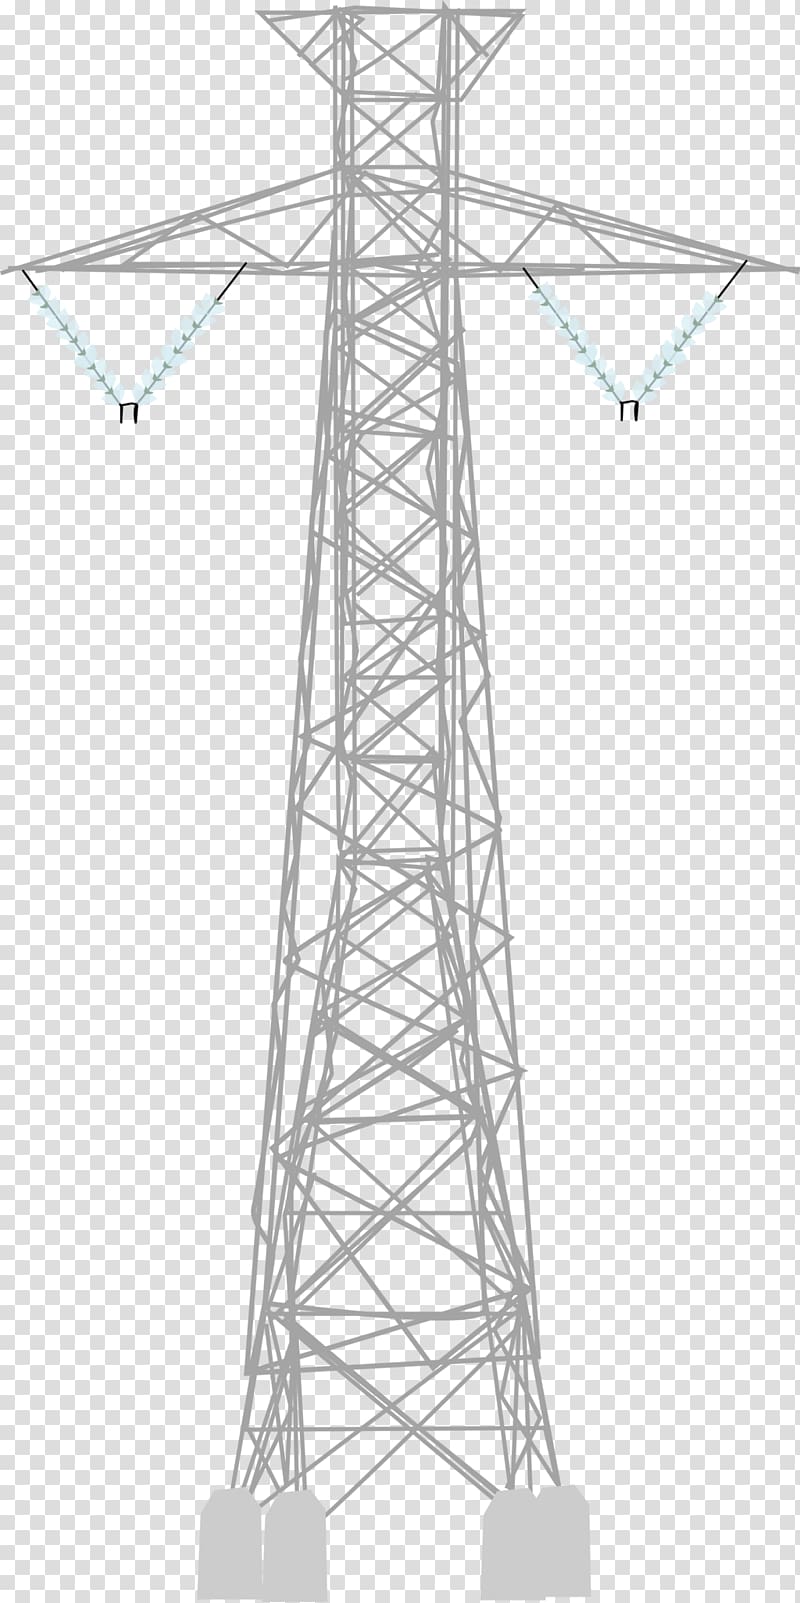 Electricity Overhead power line Transmission tower Public utility, high voltage transparent background PNG clipart